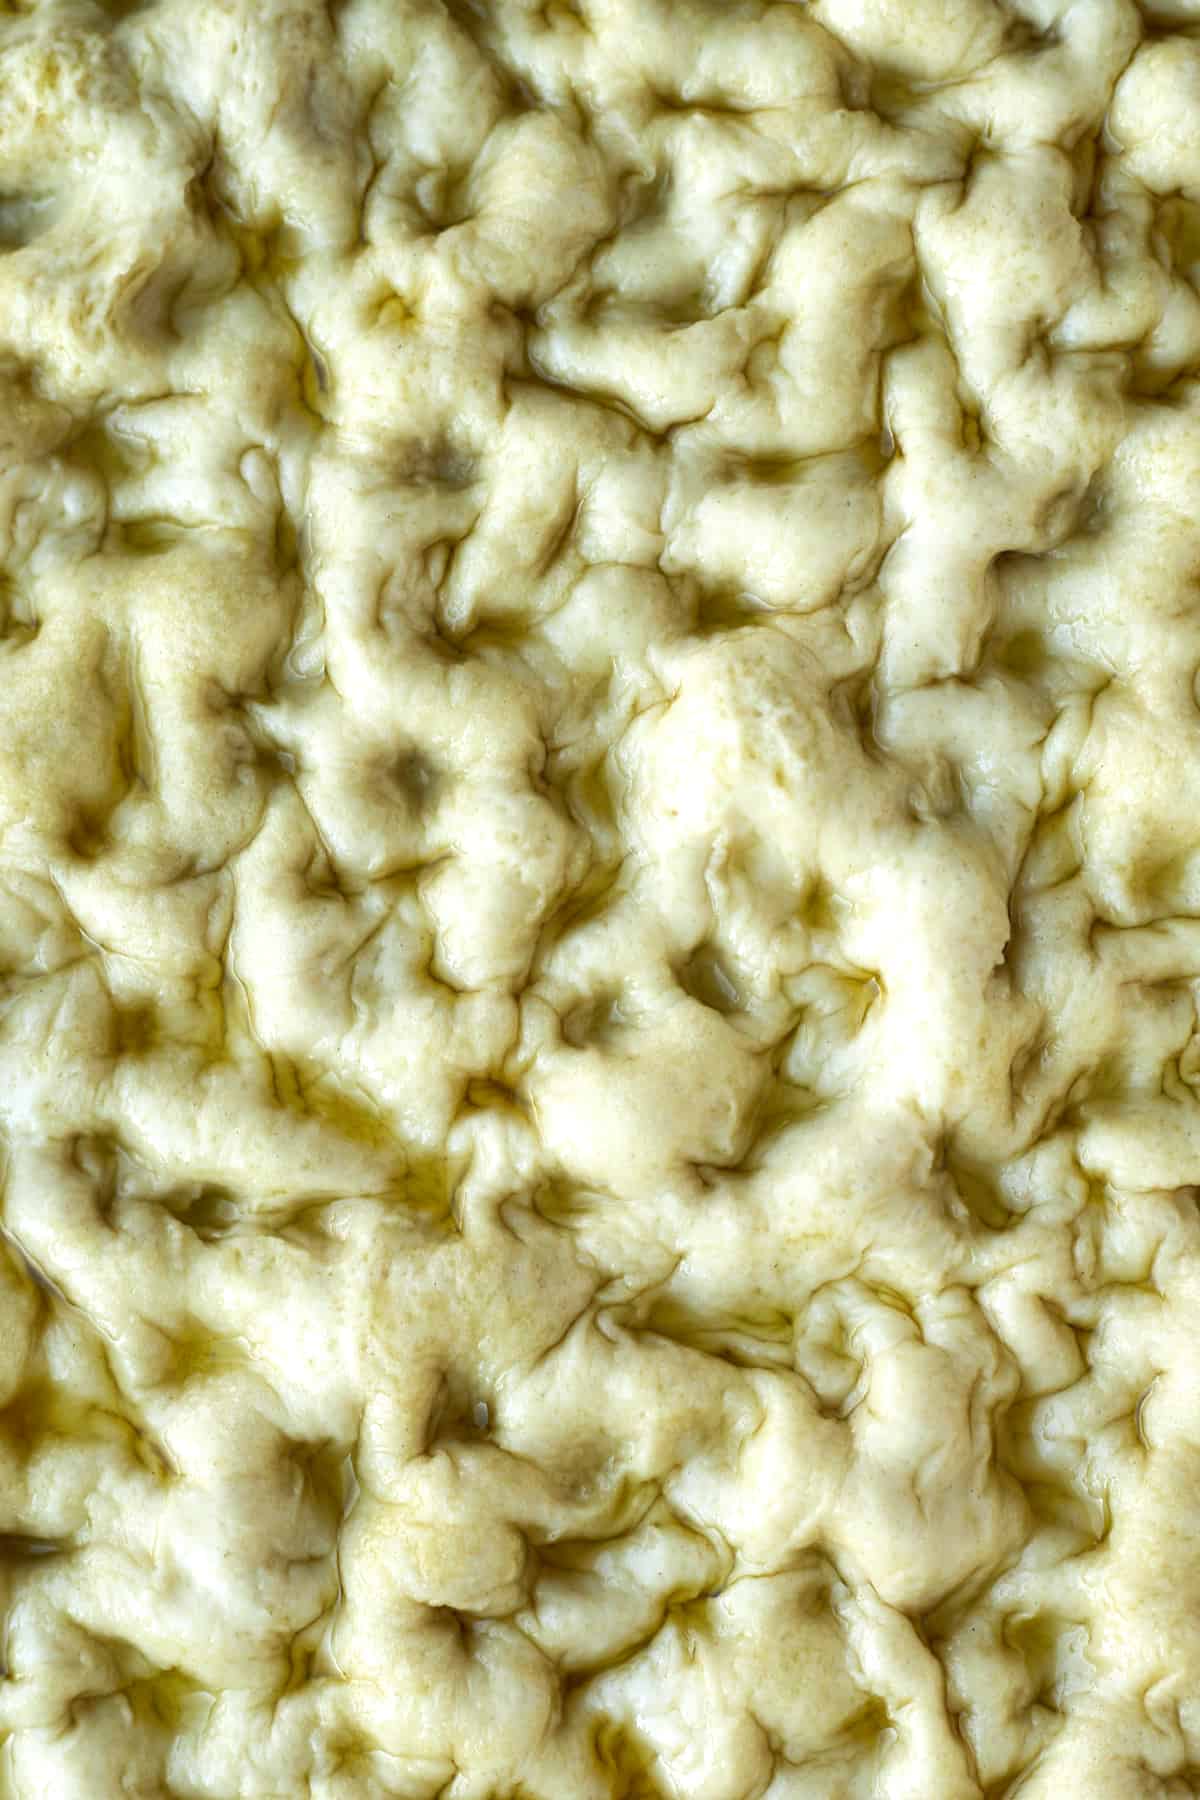 close up image of raw bread roll dough with indentations